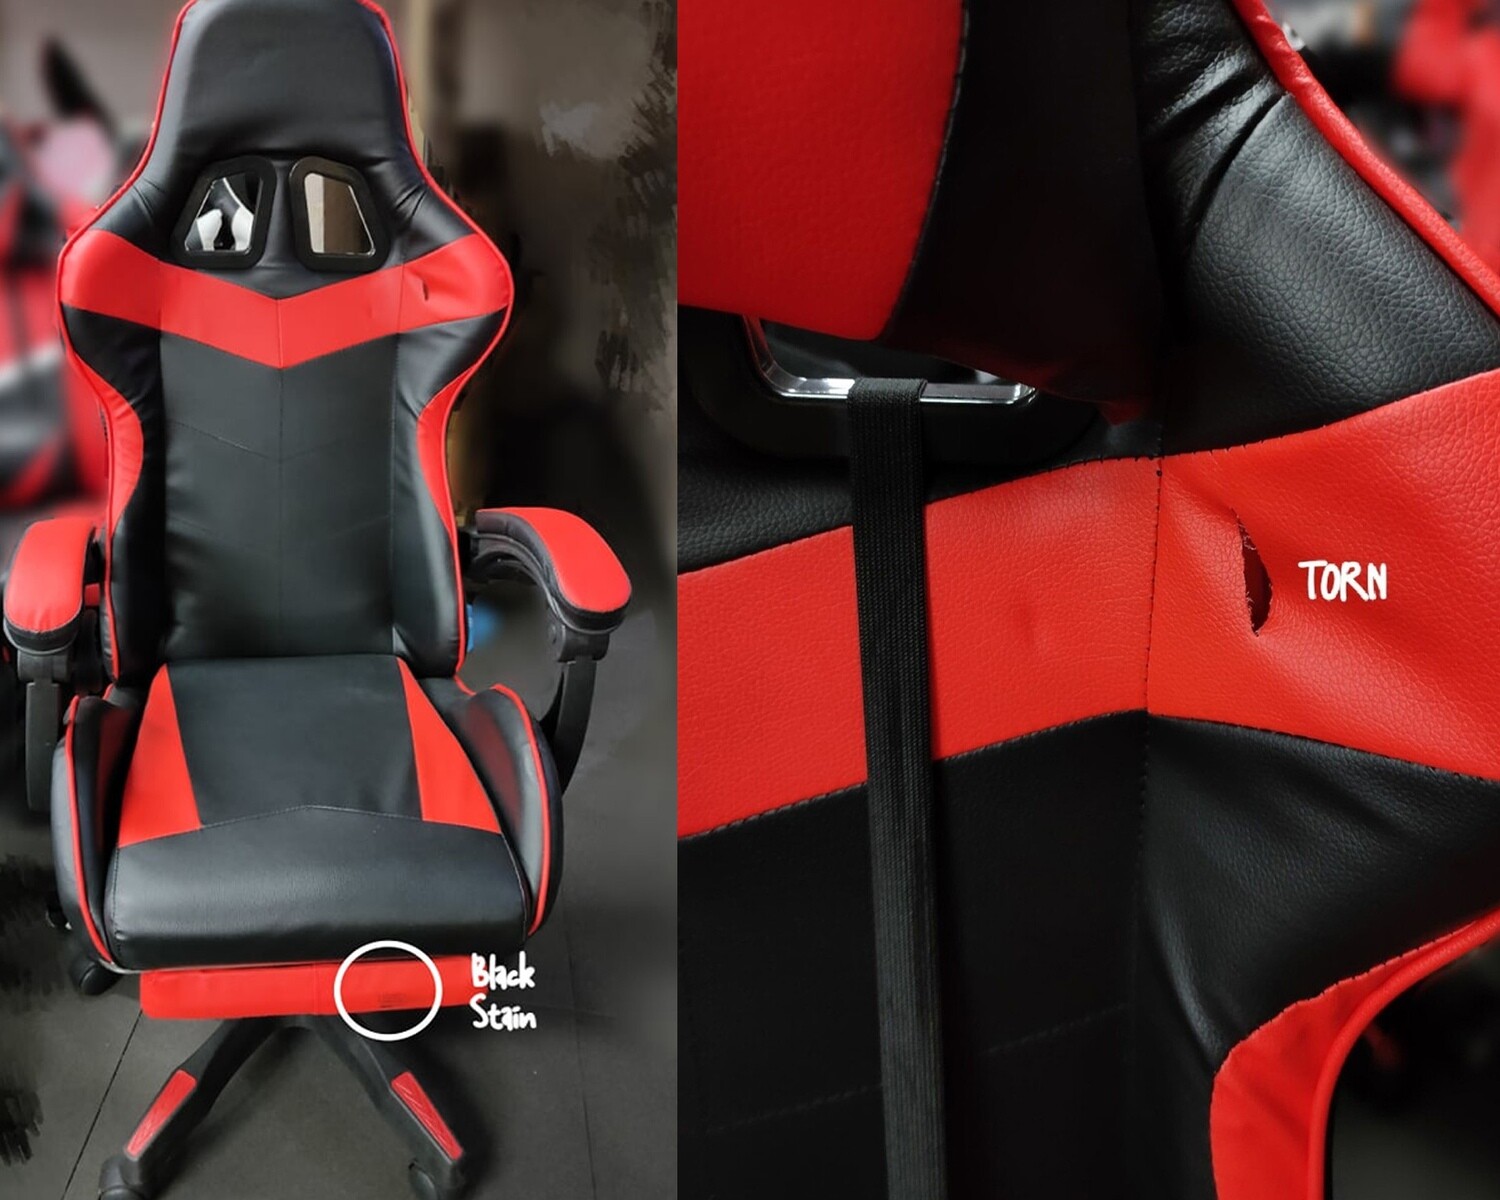 (Sale) OFX G11 Gaming Chair w/ Foot Rest (Red+Black) (Backrest Torn, Stains & No Pillows)